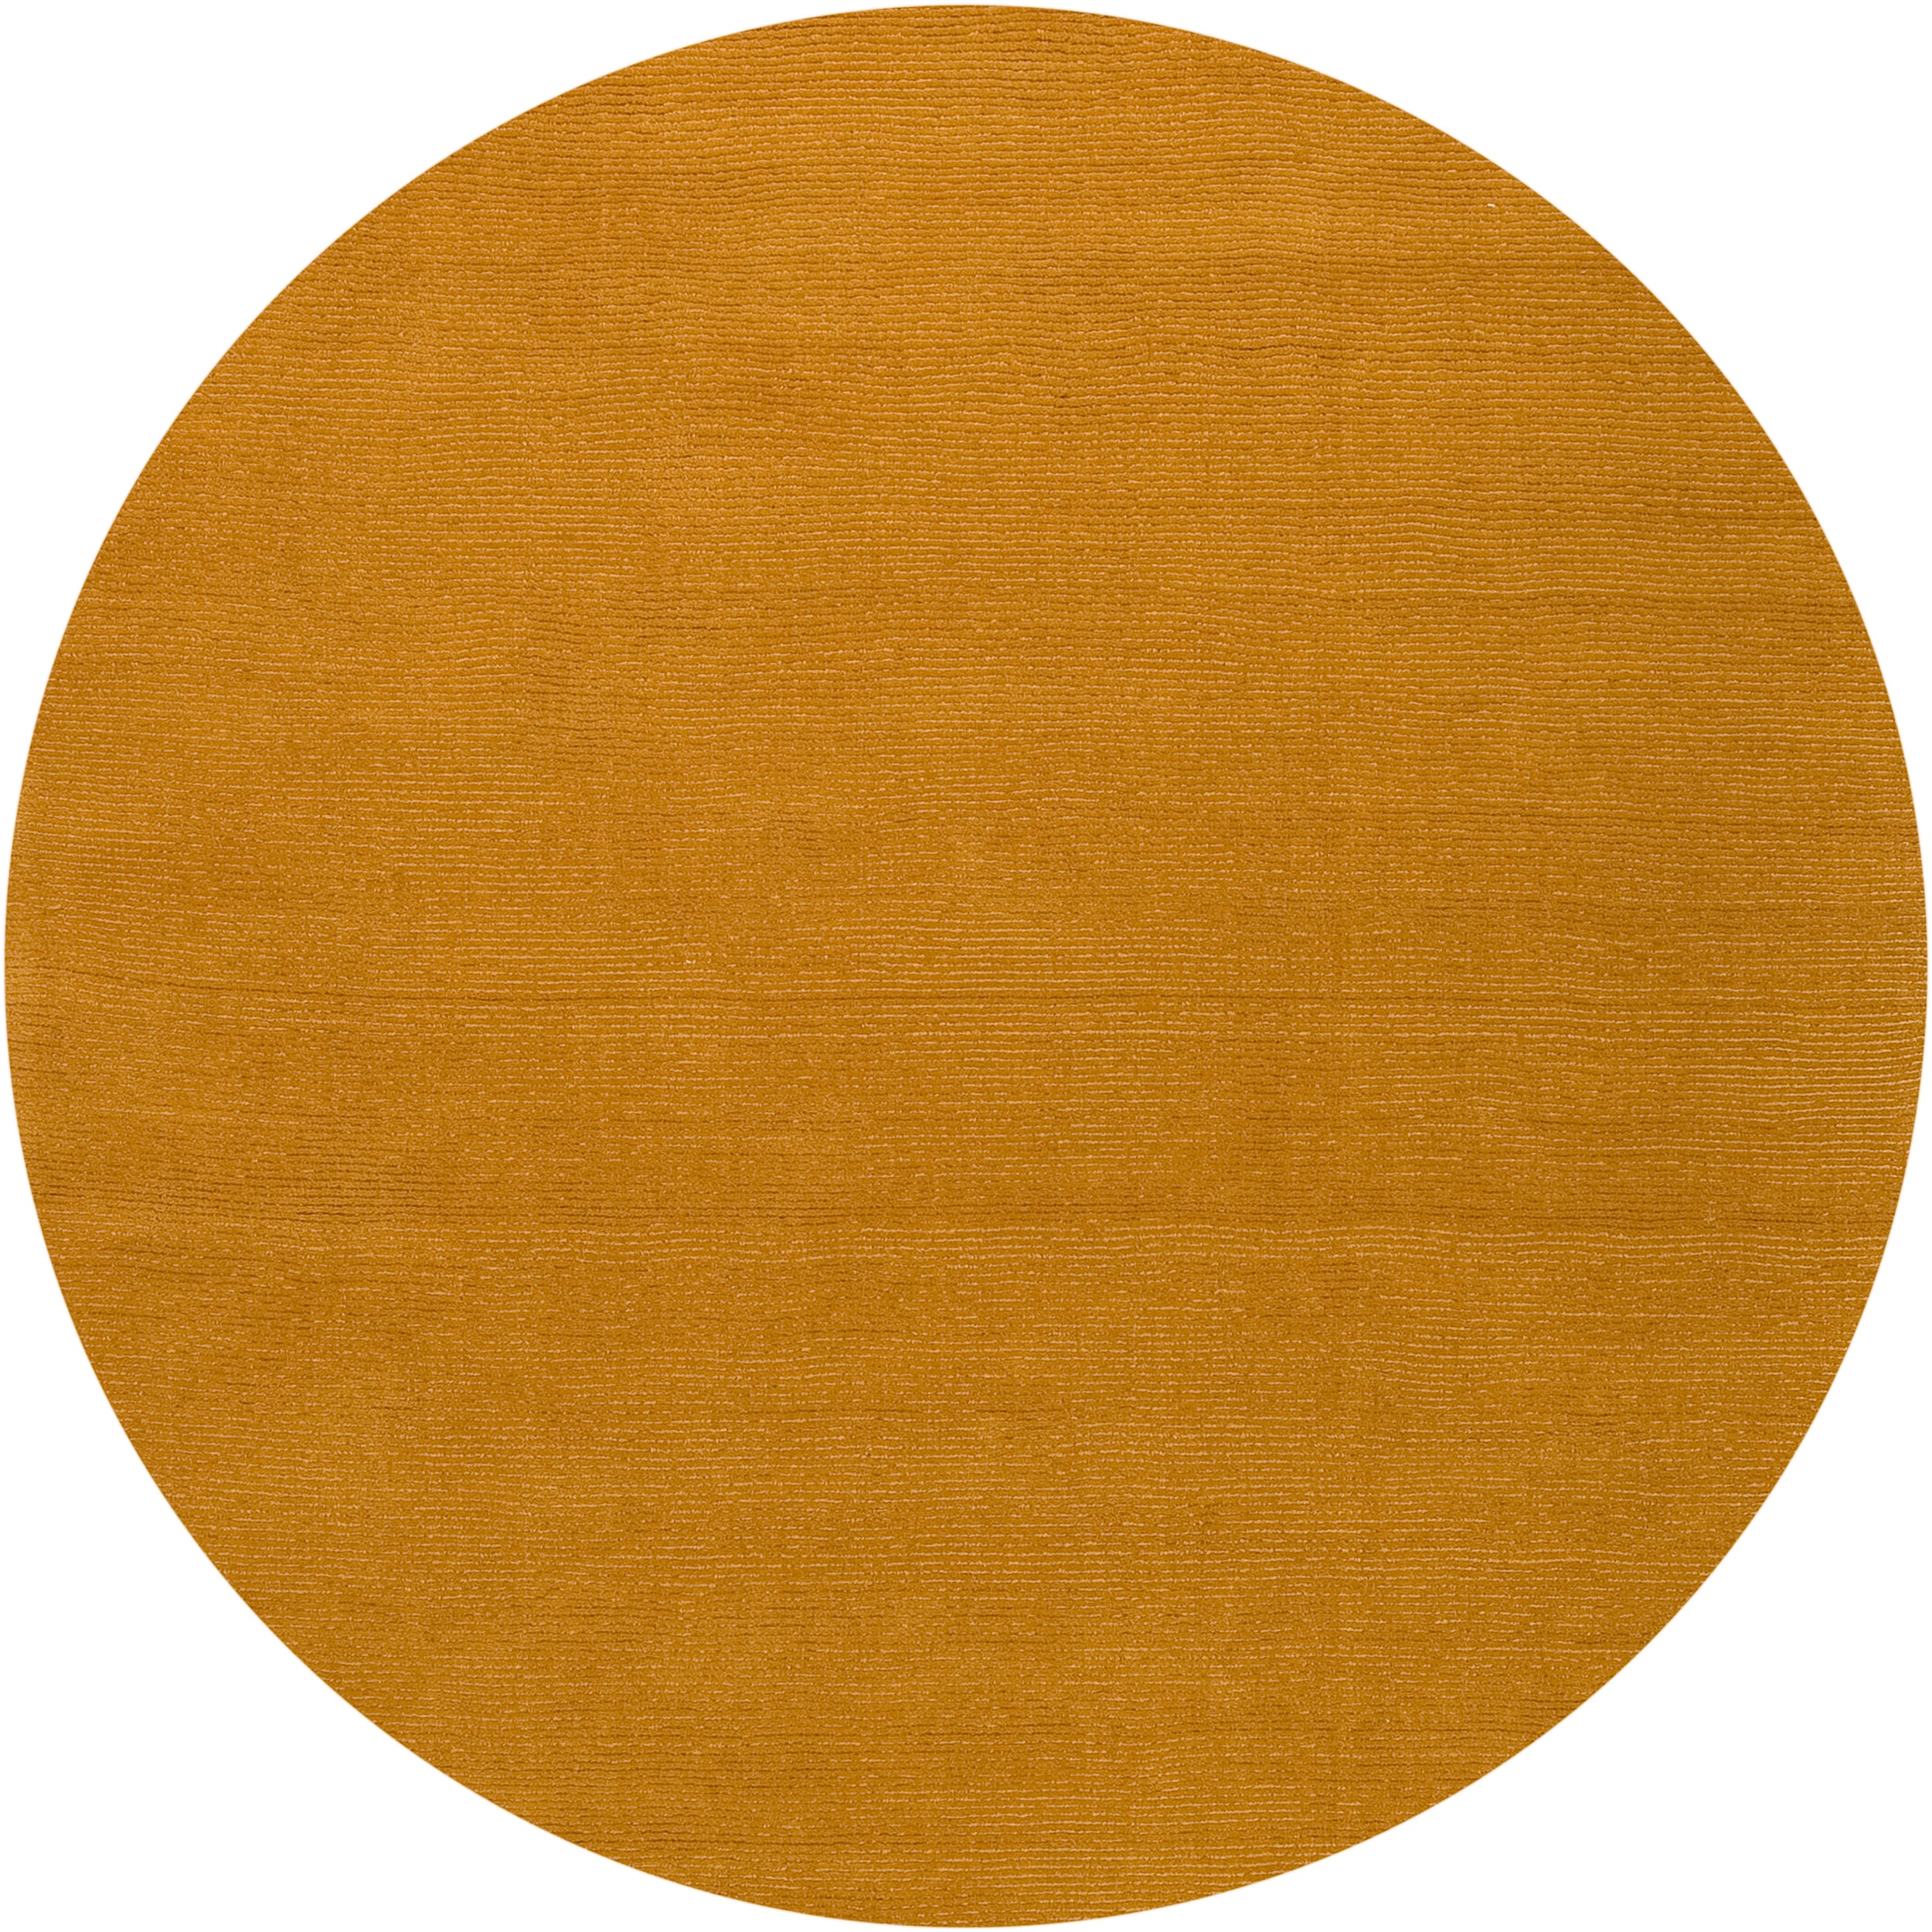 Hand crafted Yellow Solid Casual Alle Wool Rug (8 Round)